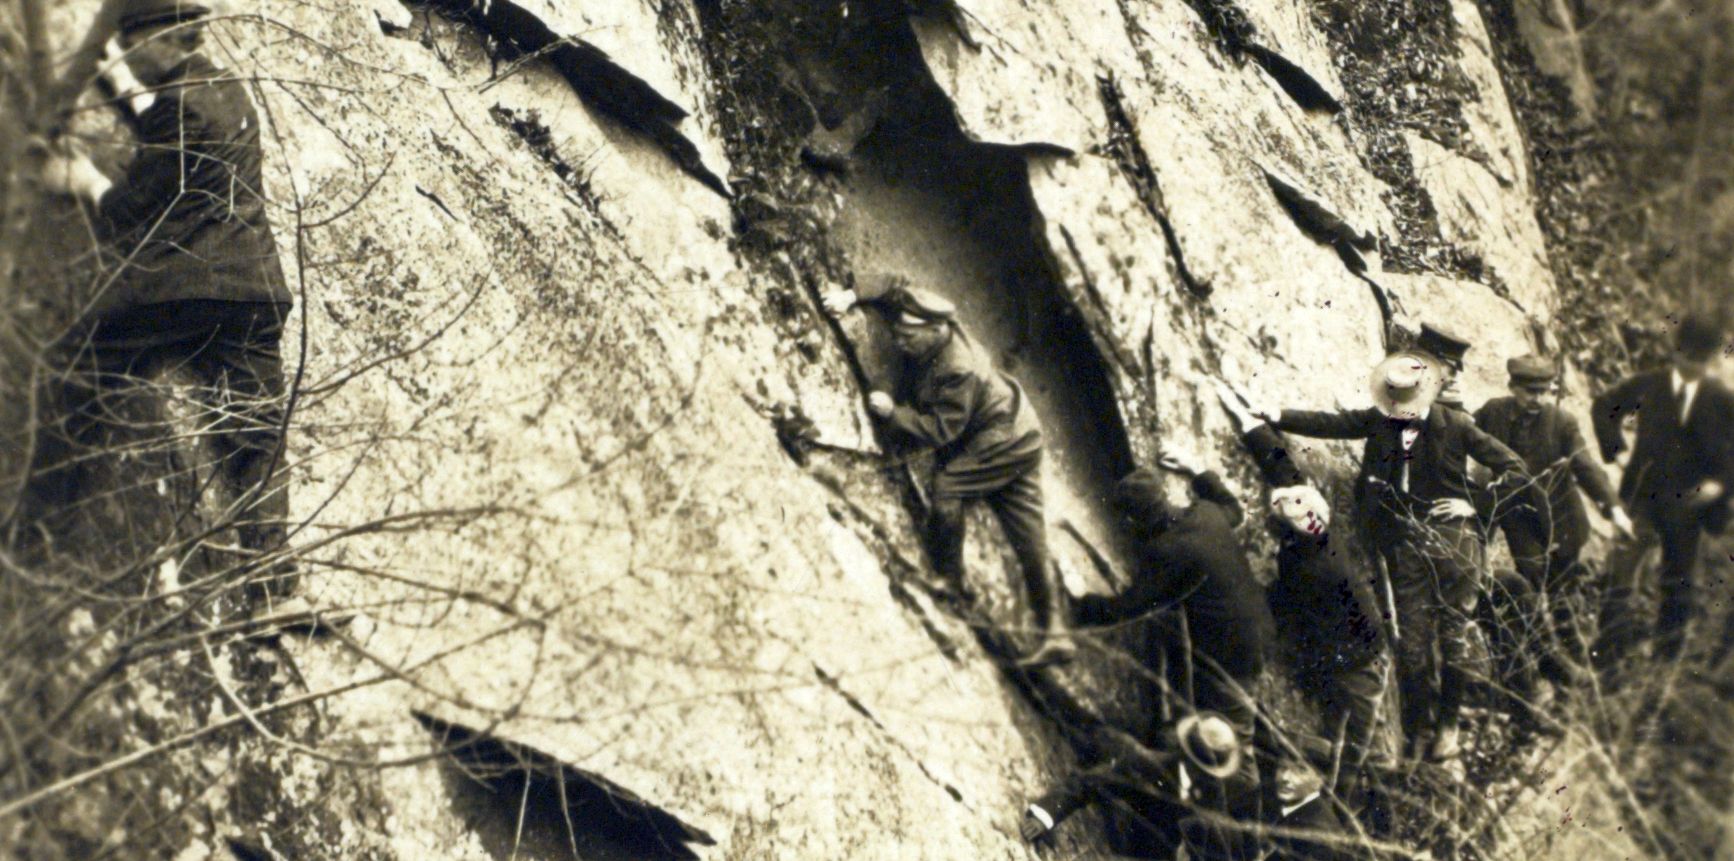 Teddy leads a a group in climbing, probably on Pulpit Rock in Rock Creek Park. Library of Congress.